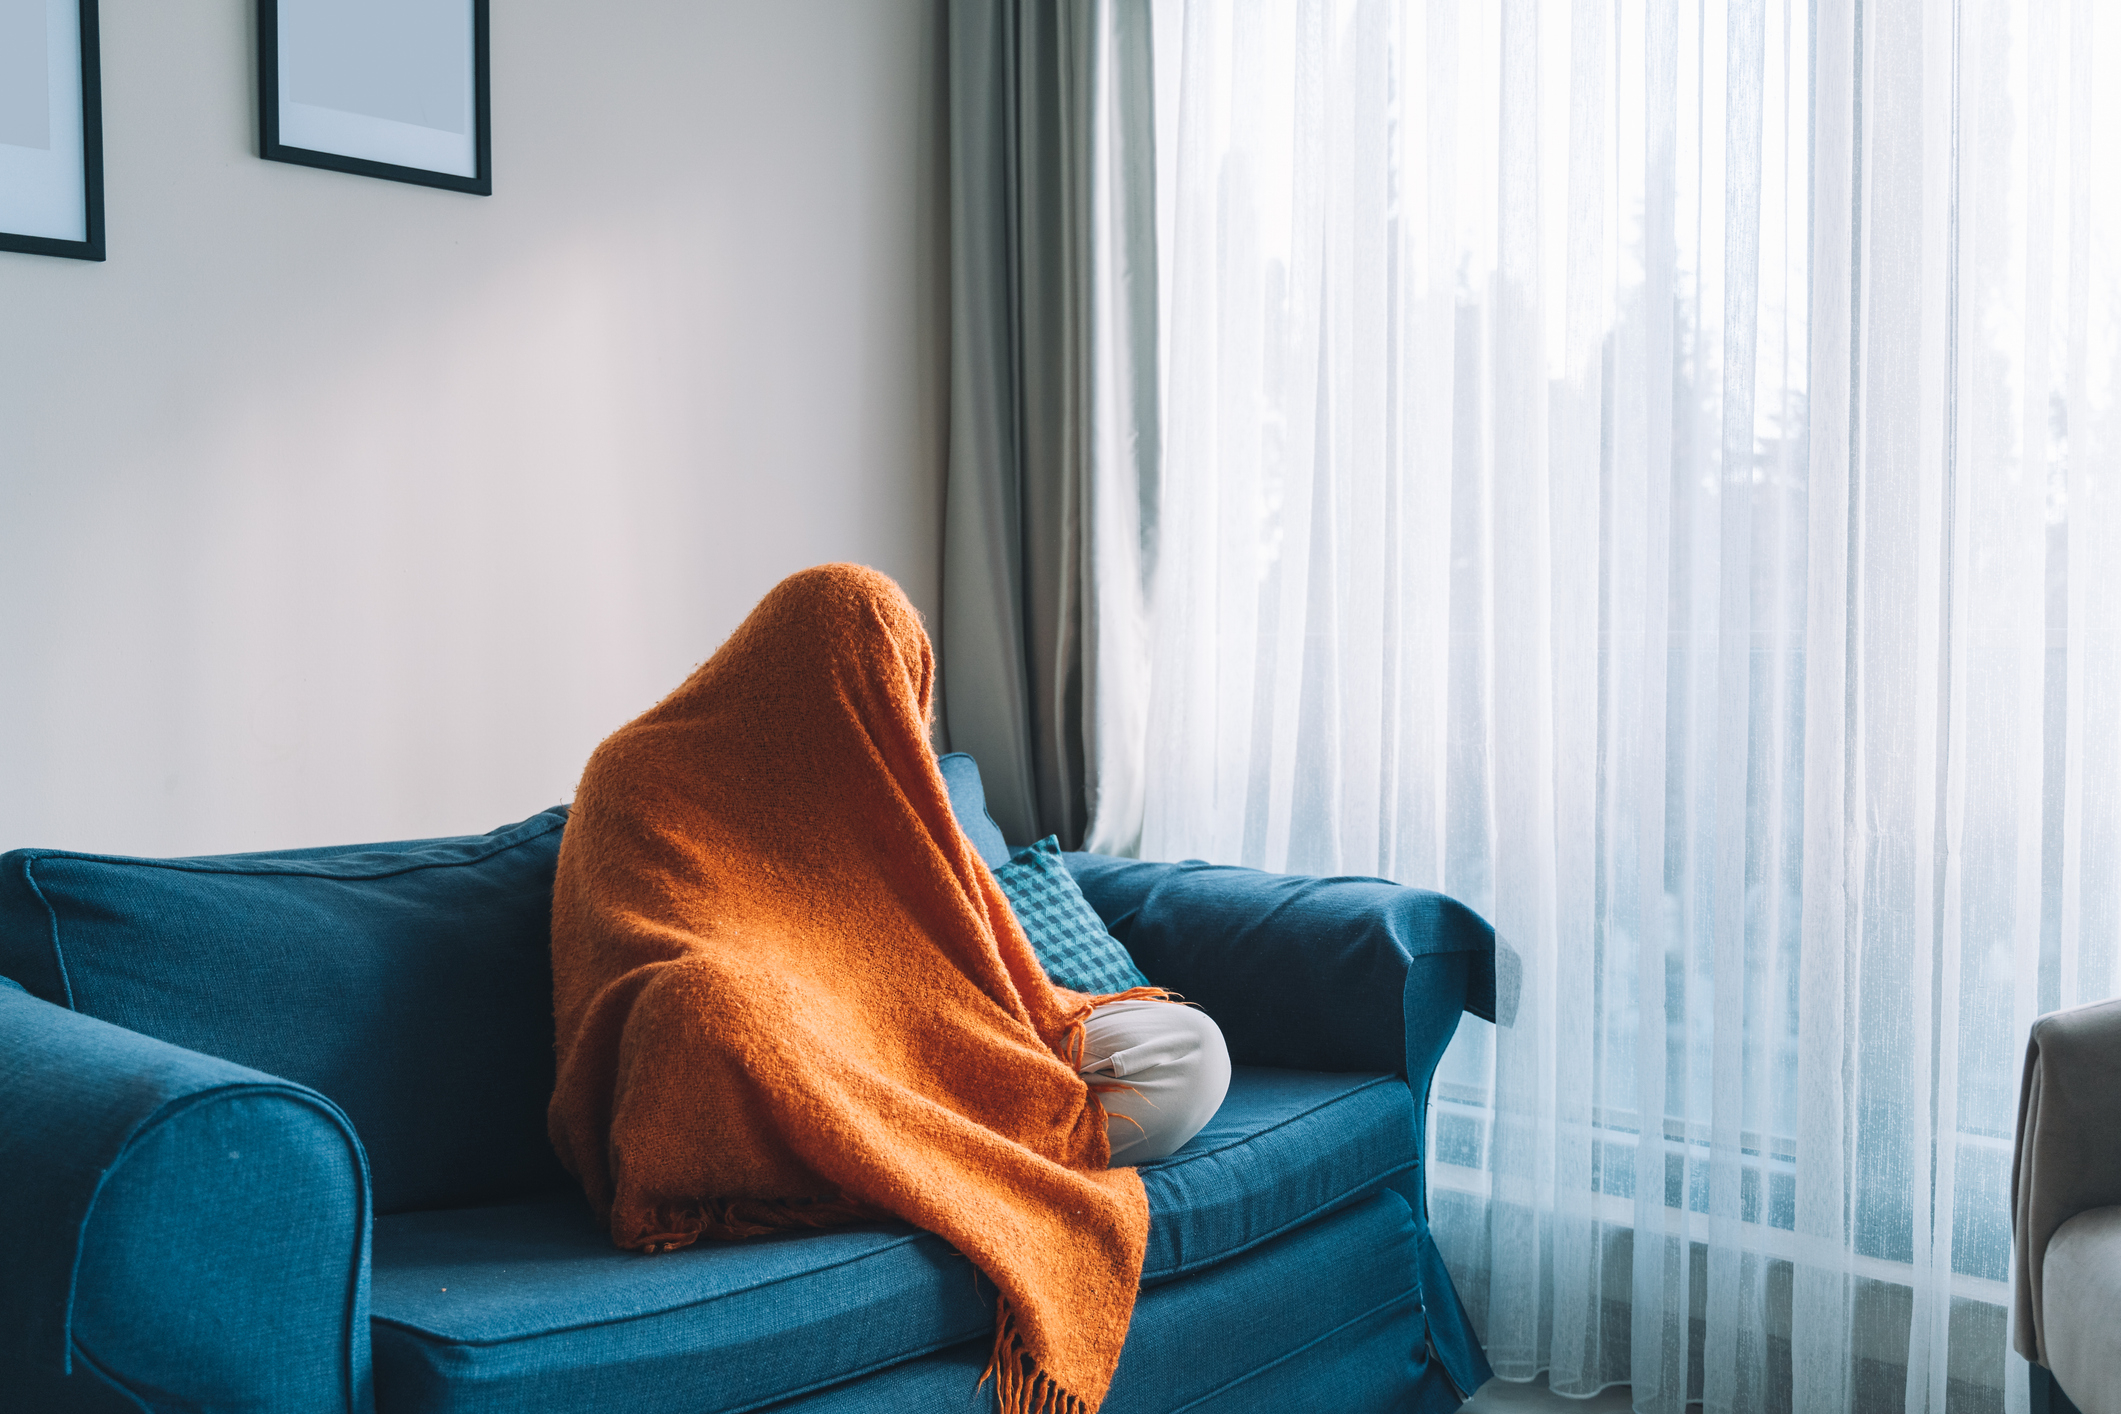 Person under orange blanket on blue couch, cozy domestic scene with natural light